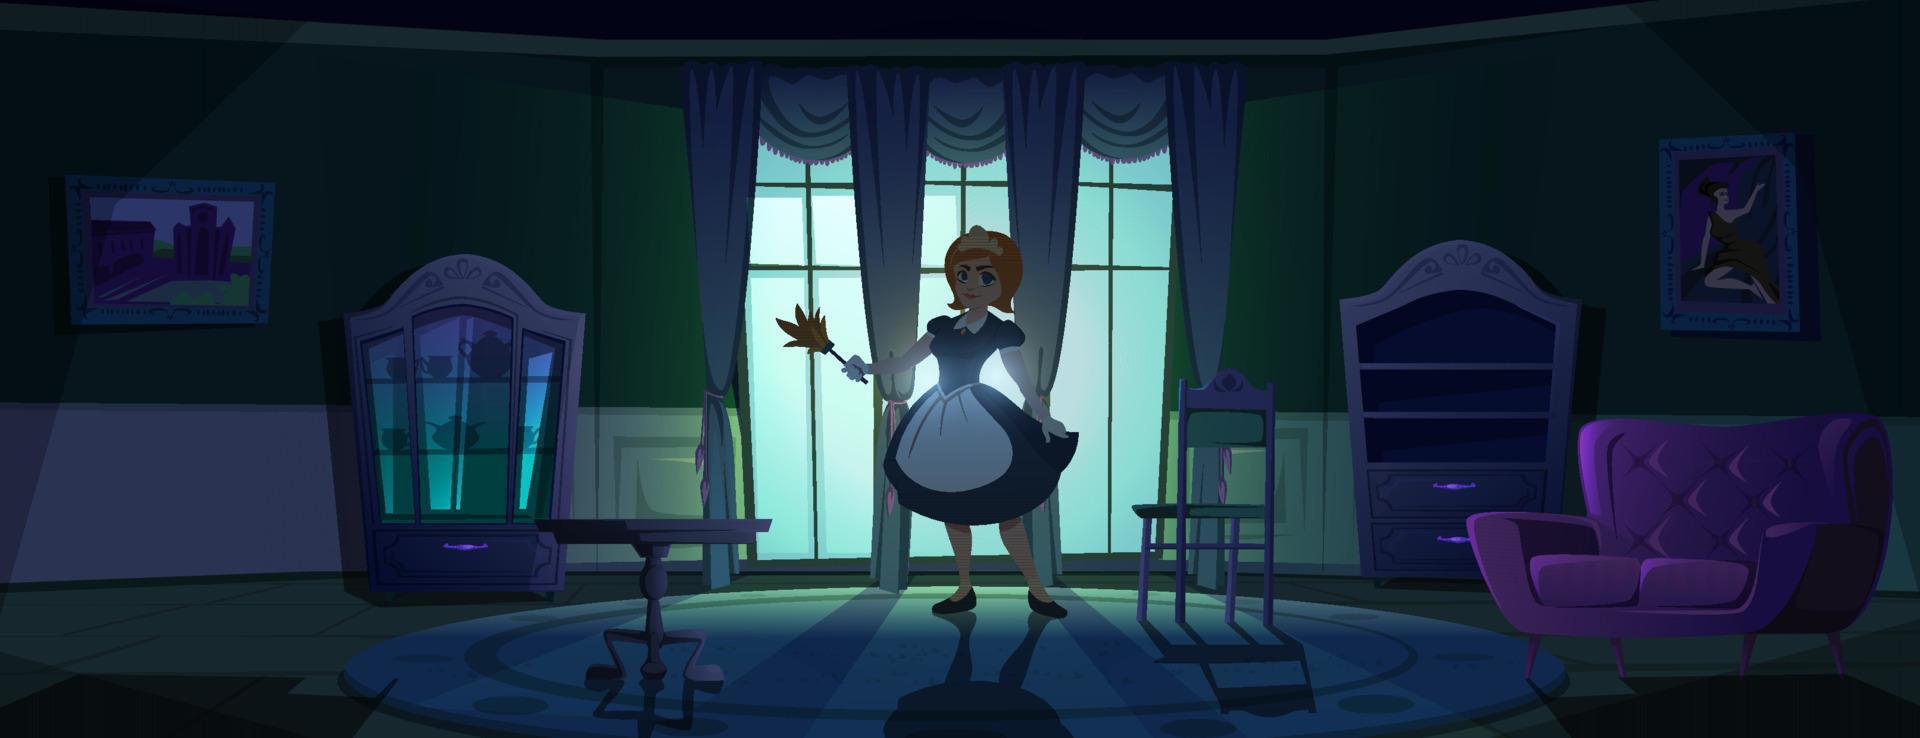 Maid in apron in dark living room at night vector